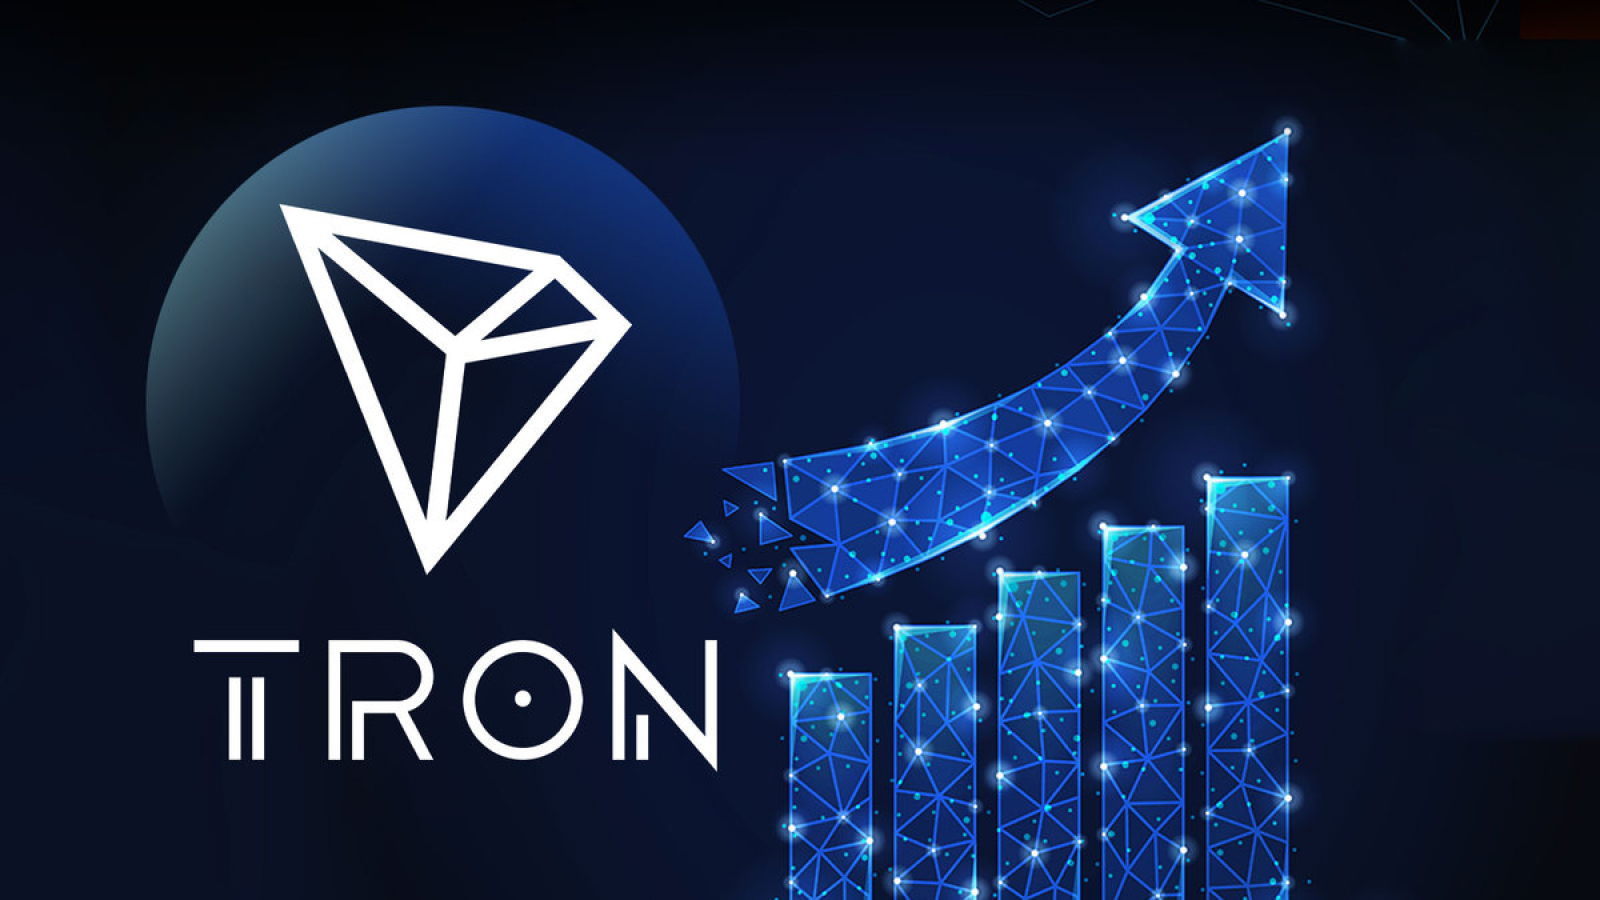 After Musk, Tron Founder Wants To Take Twitter Private At $60 Per Share